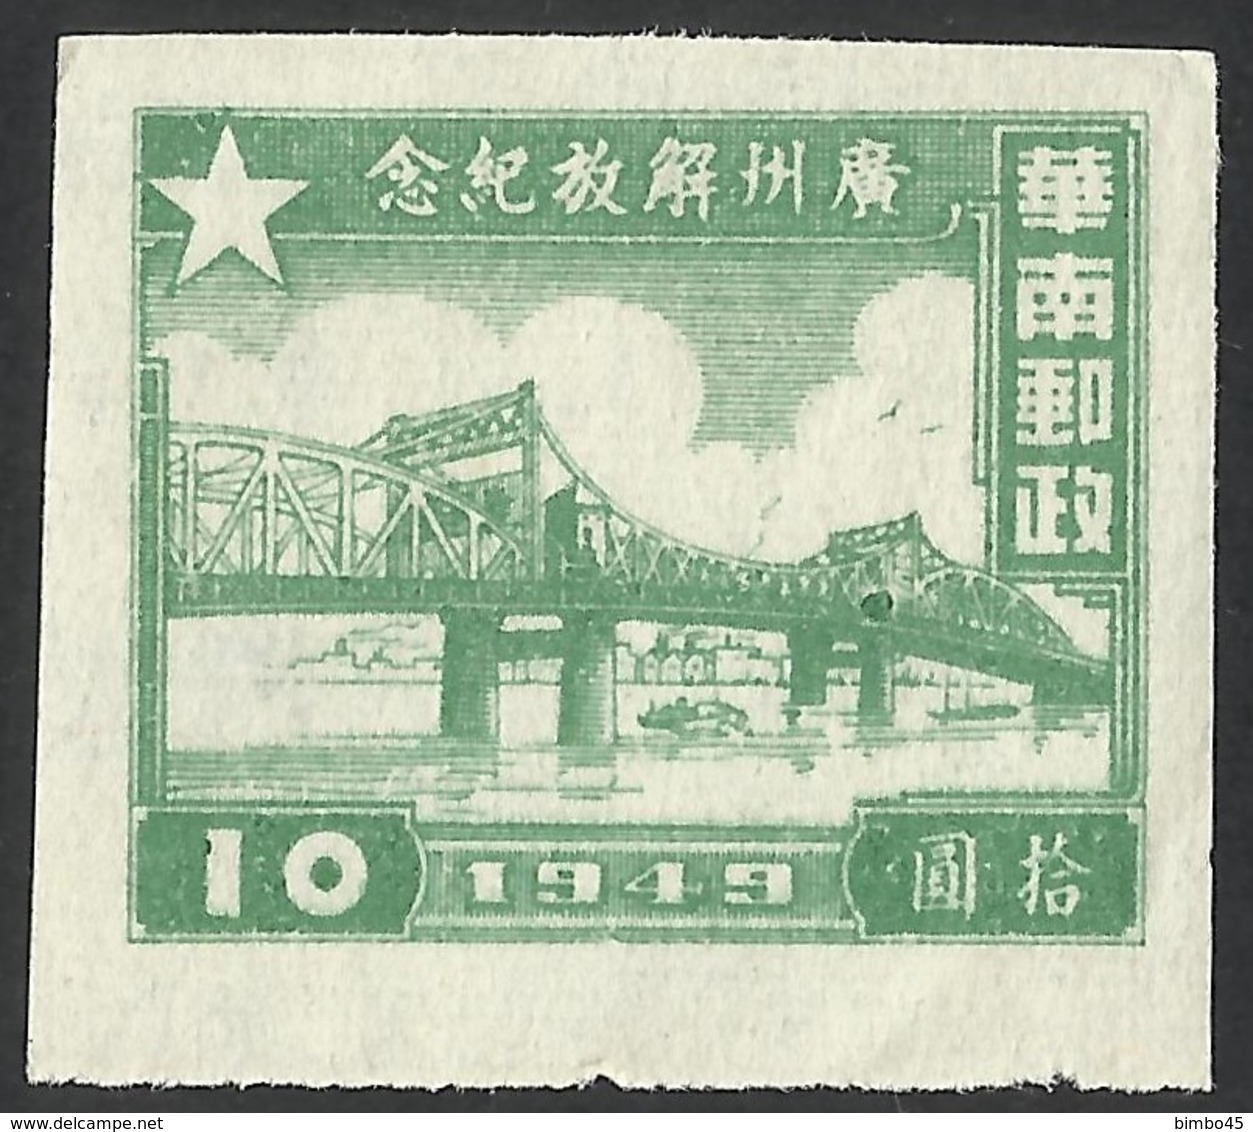 ERRORS--Southern CHINA 1949 Pearl River Bridge,Canton $10-- Large Green Spots  On The Mark.--MNG-Mint No Gum. - Chine Du Sud 1949-50